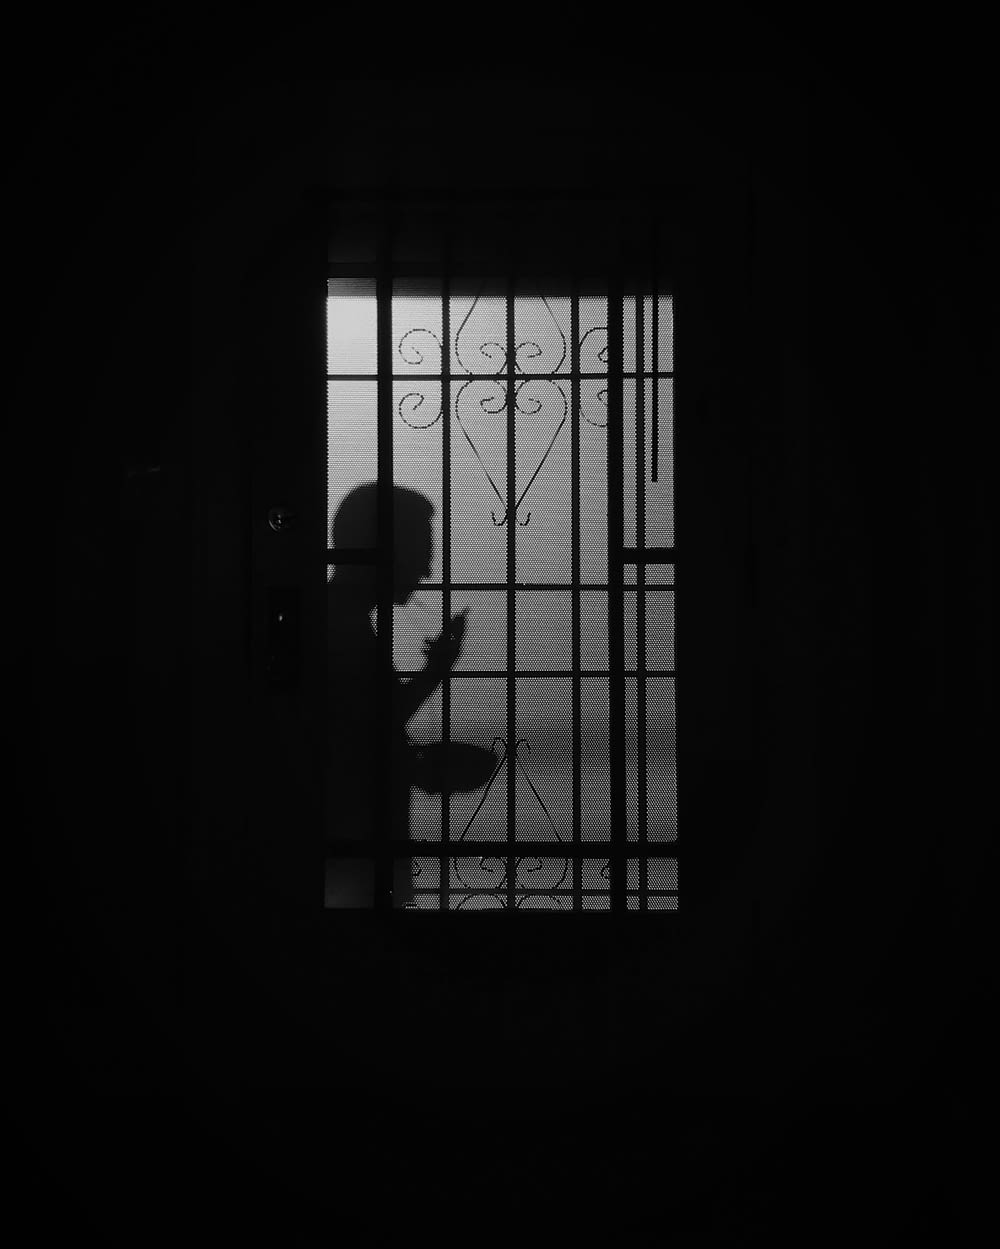 silhouette of person standing on window